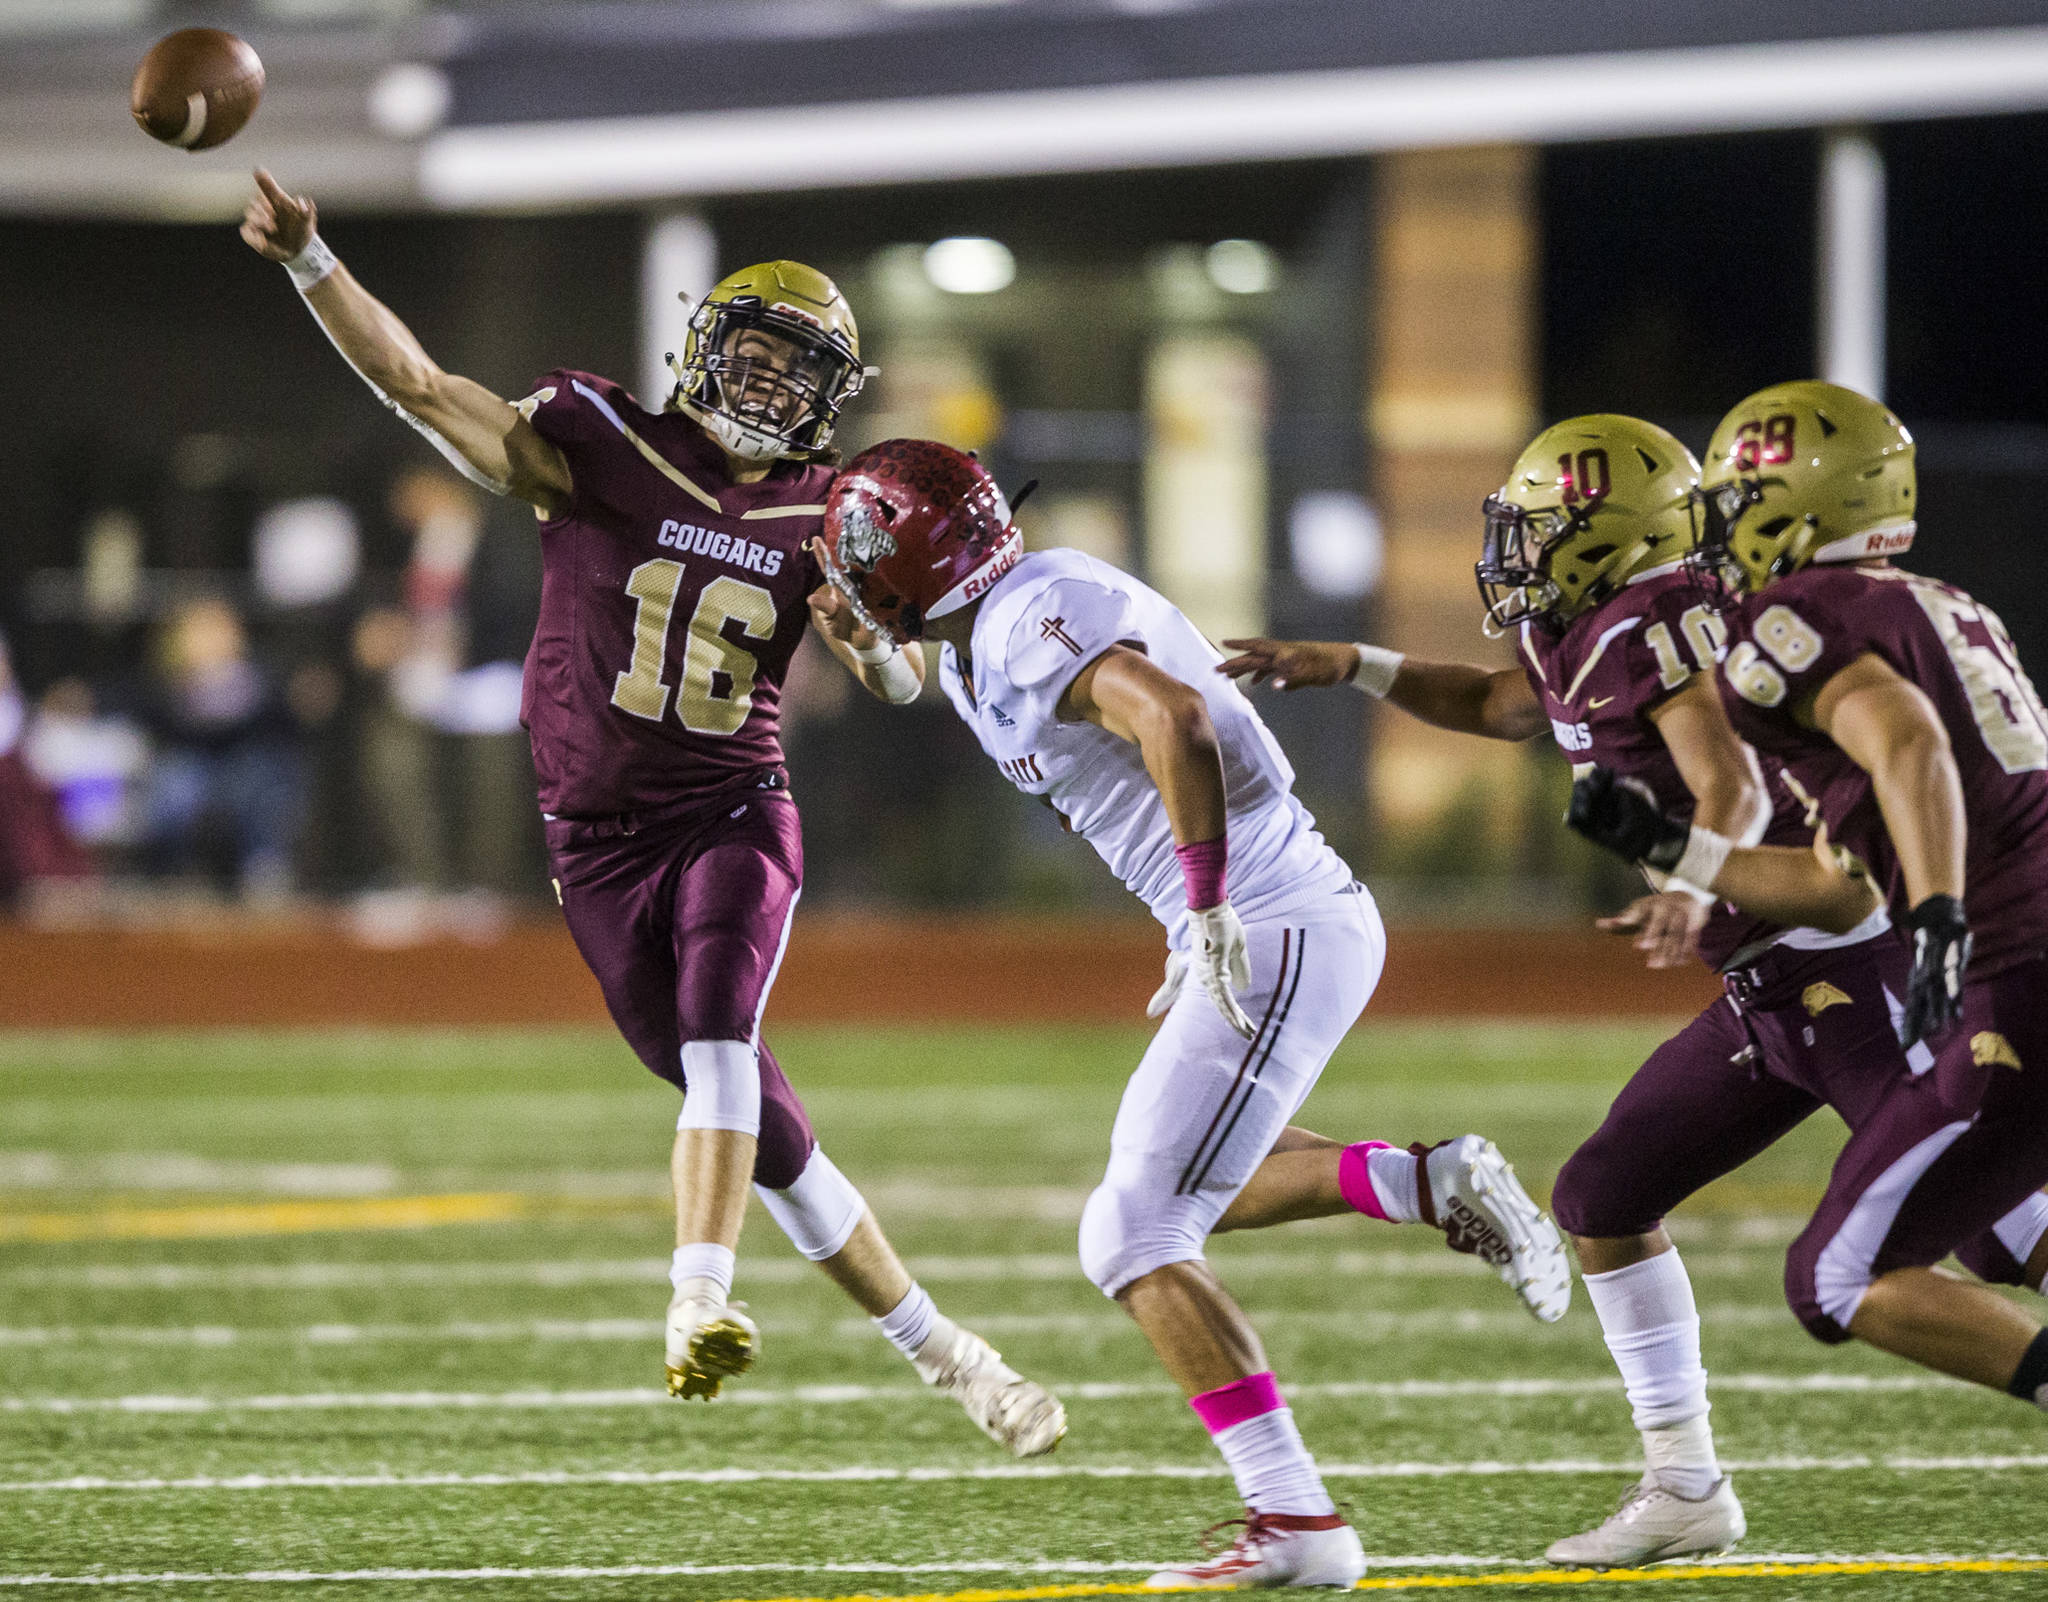 Dual-threat quarterback Jared Taylor led 10th-ranked Lakewood to a 35-27 win over third-ranked Archbishop Murphy in a pivotal Northwest 2A Sky Division showdown Friday night. (Olivia Vanni / The Herald)